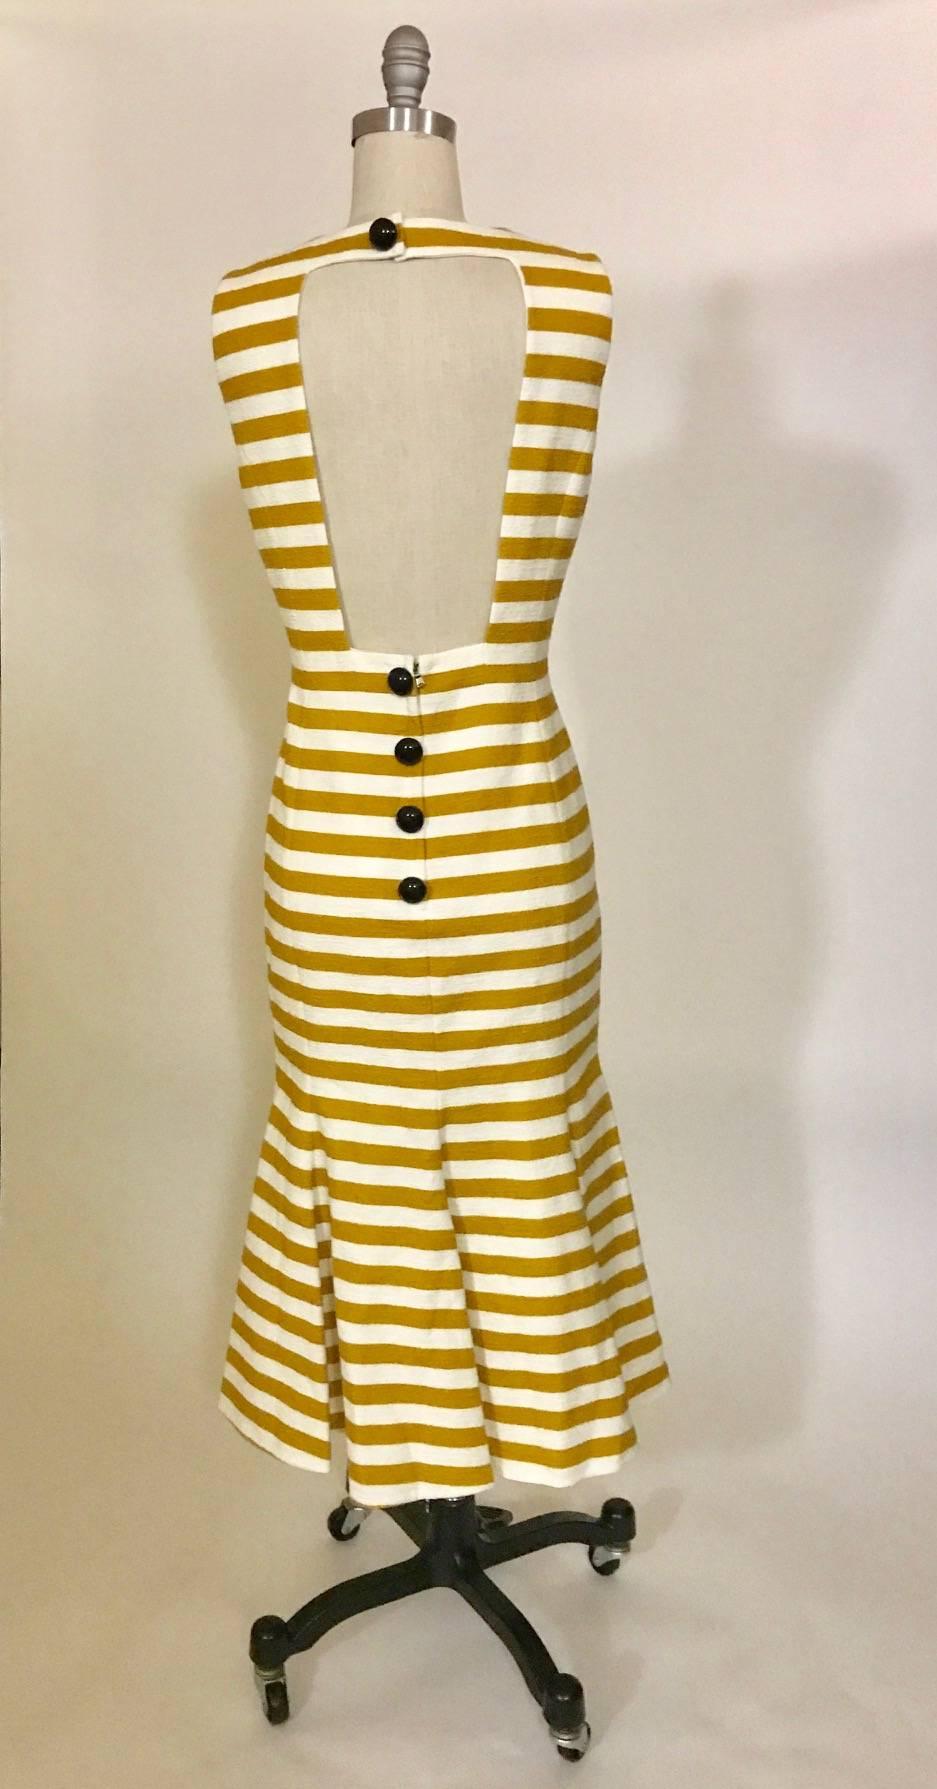 New Dolce and Gabbana Yellow and White Striped Tower of Pisa 